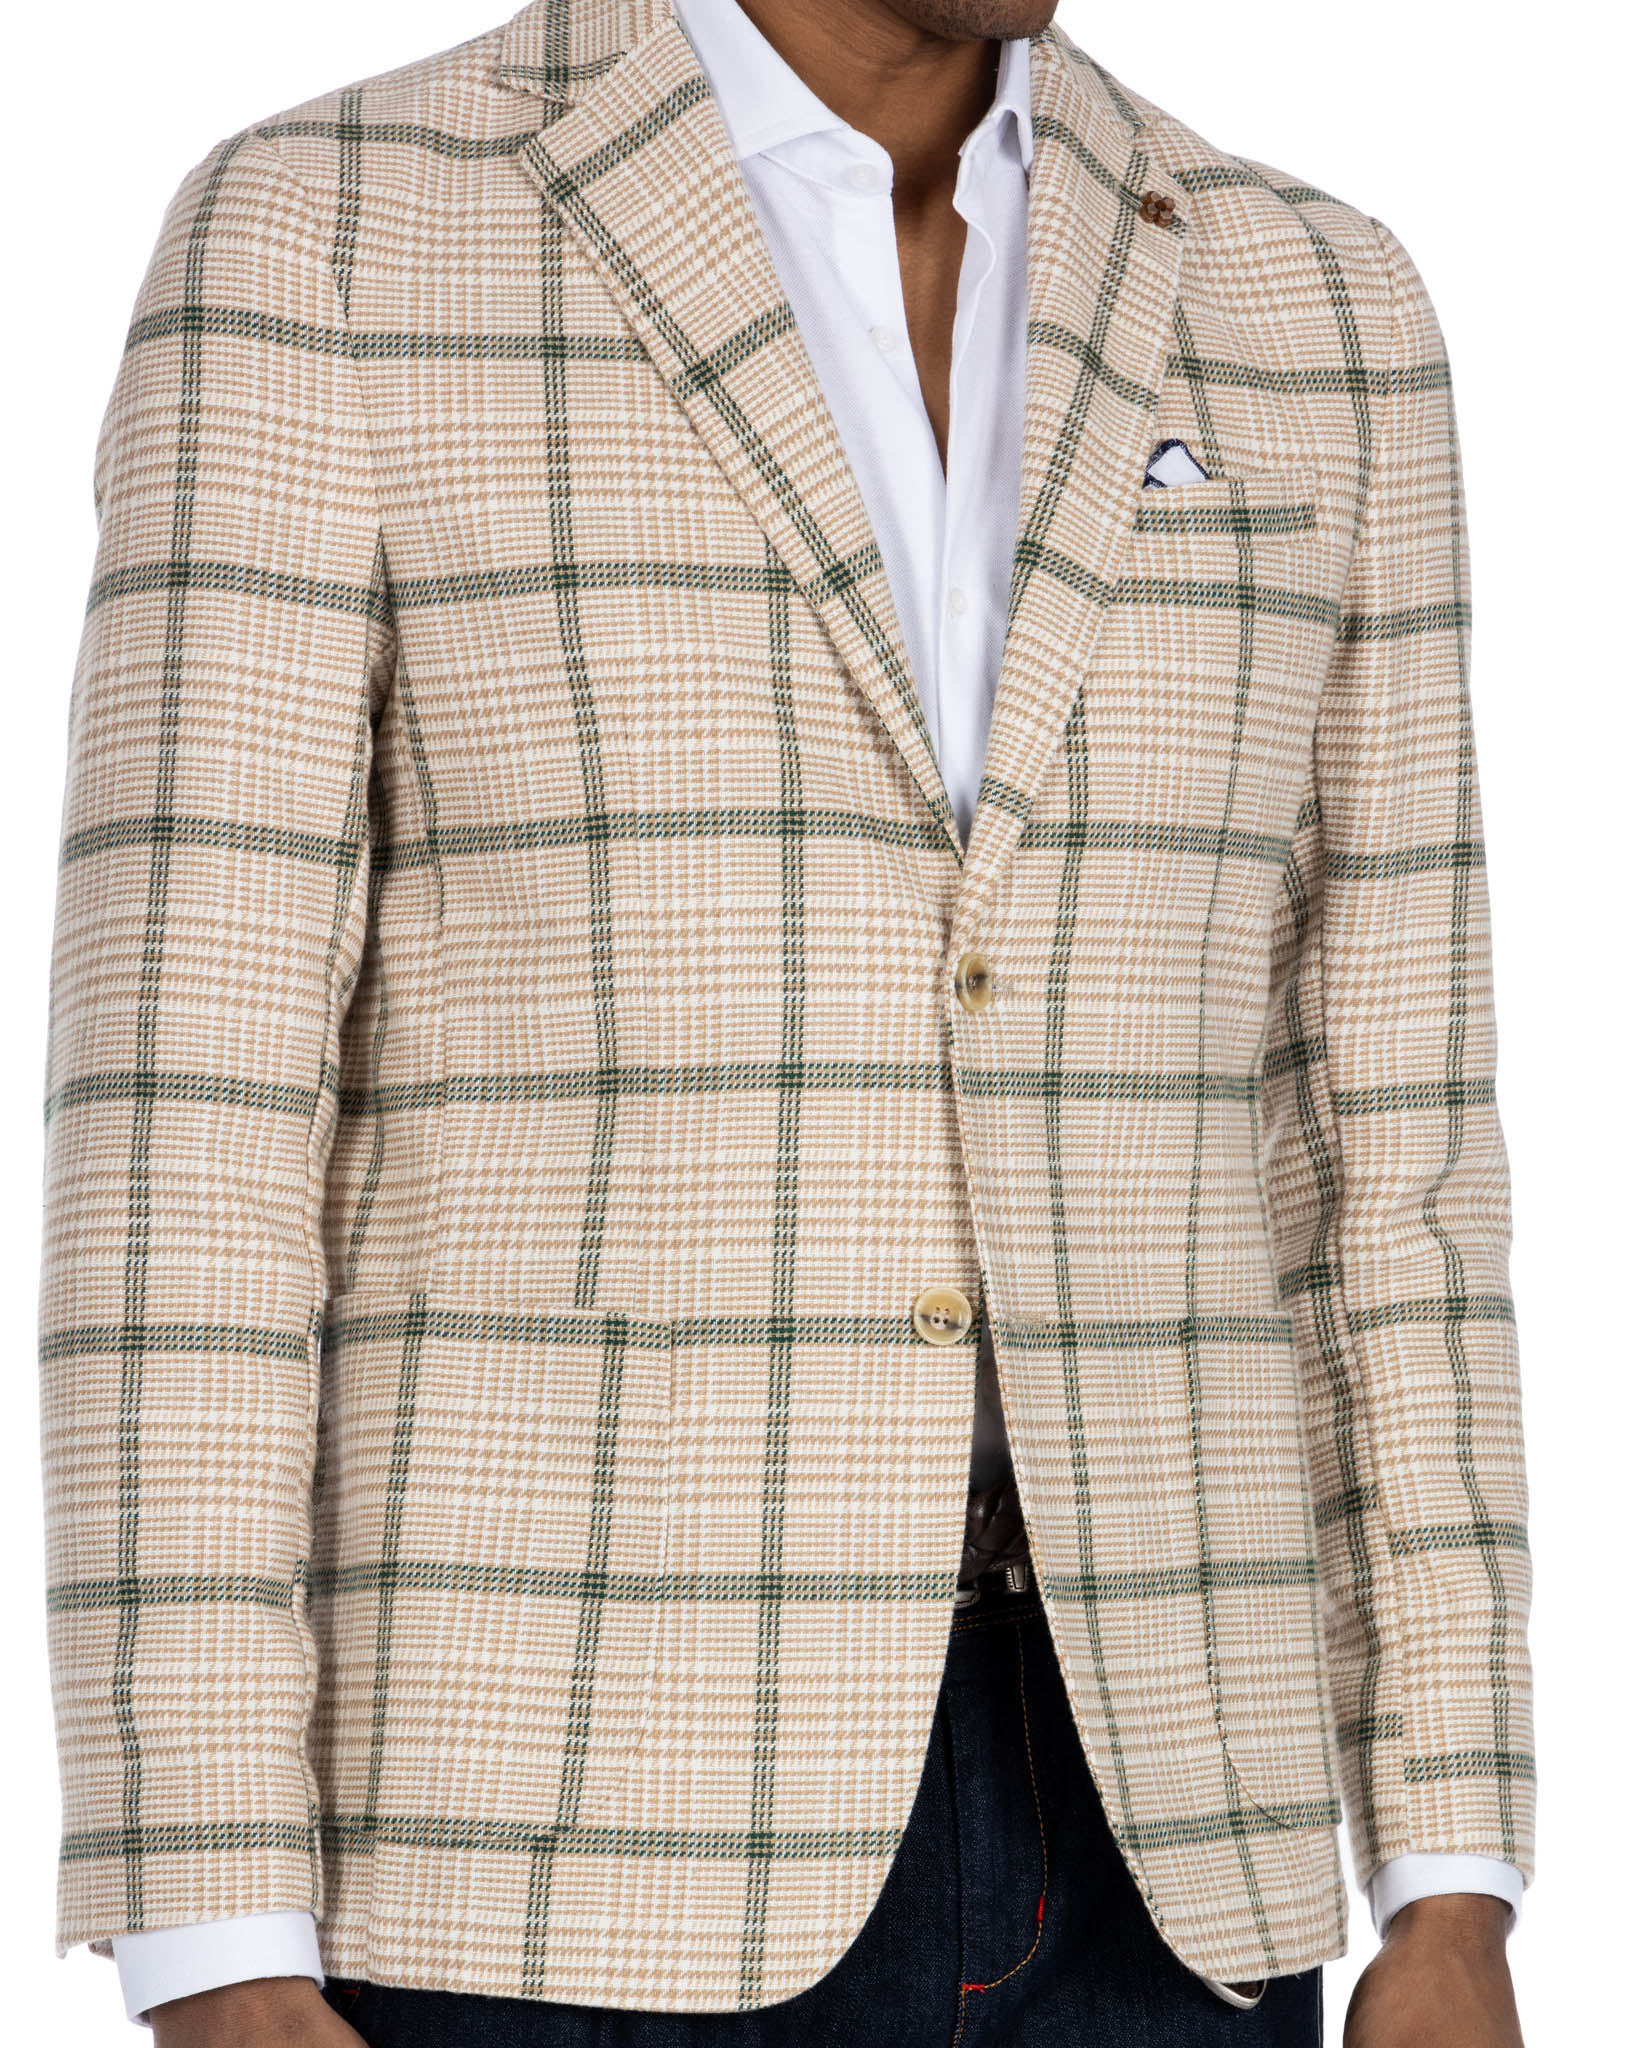 Parma - green and beige checked jacket